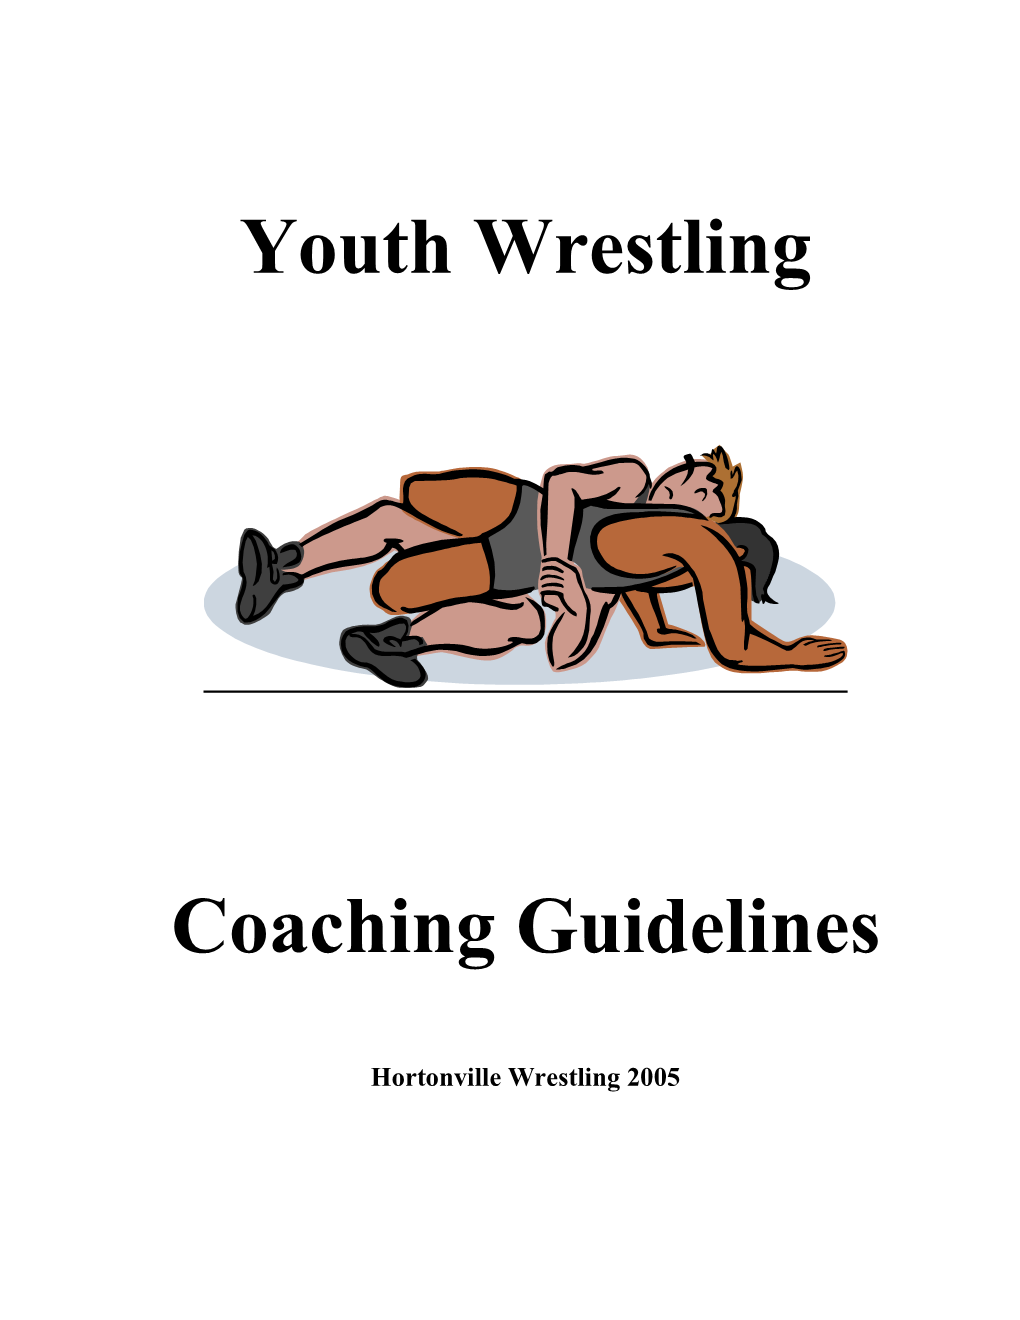 Youth Wrestling Coaching Guidelines